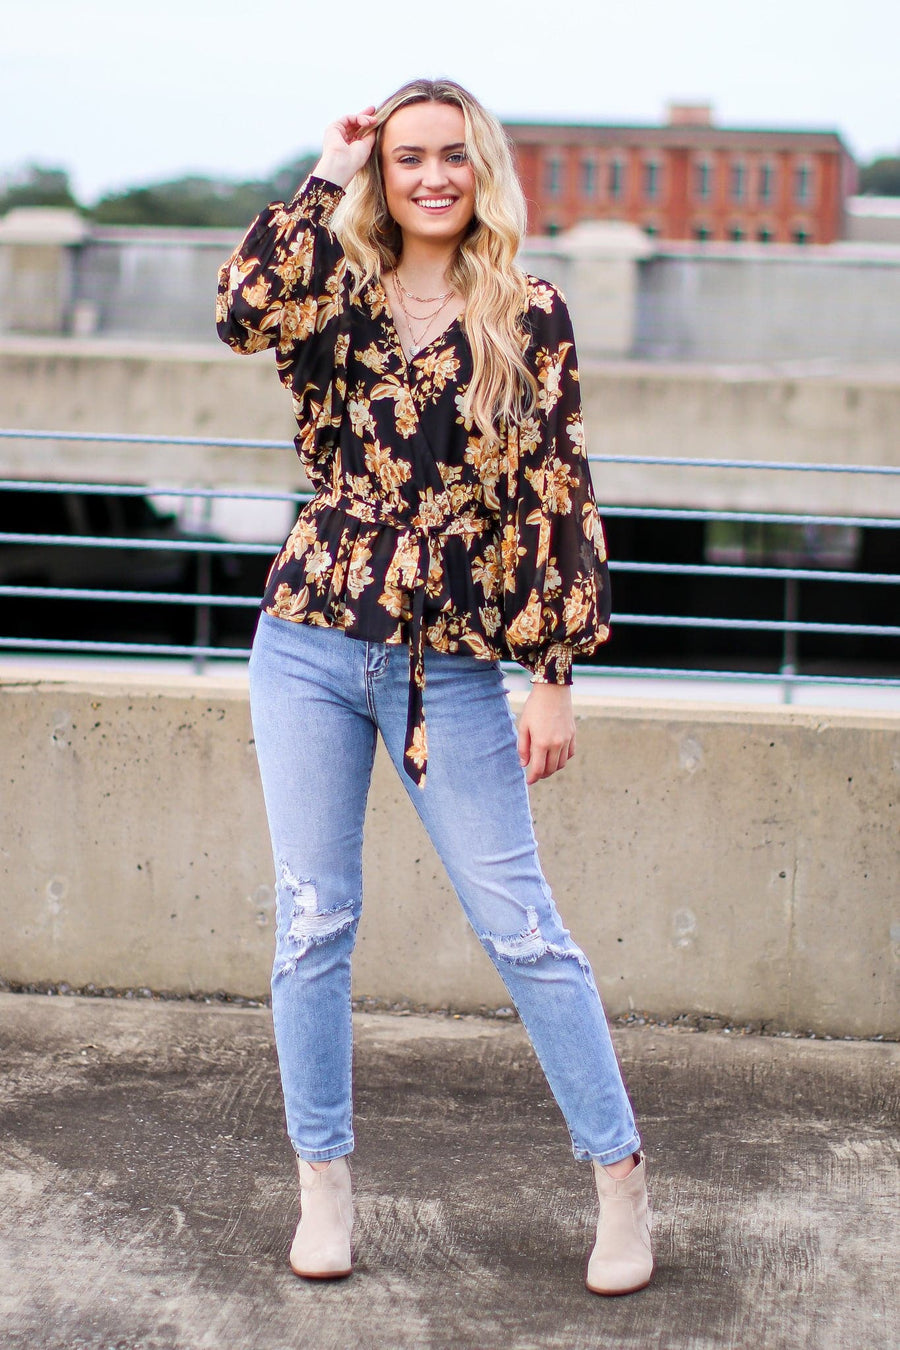  Truly Lovely Floral Peplum Top - FINAL SALE - Madison and Mallory